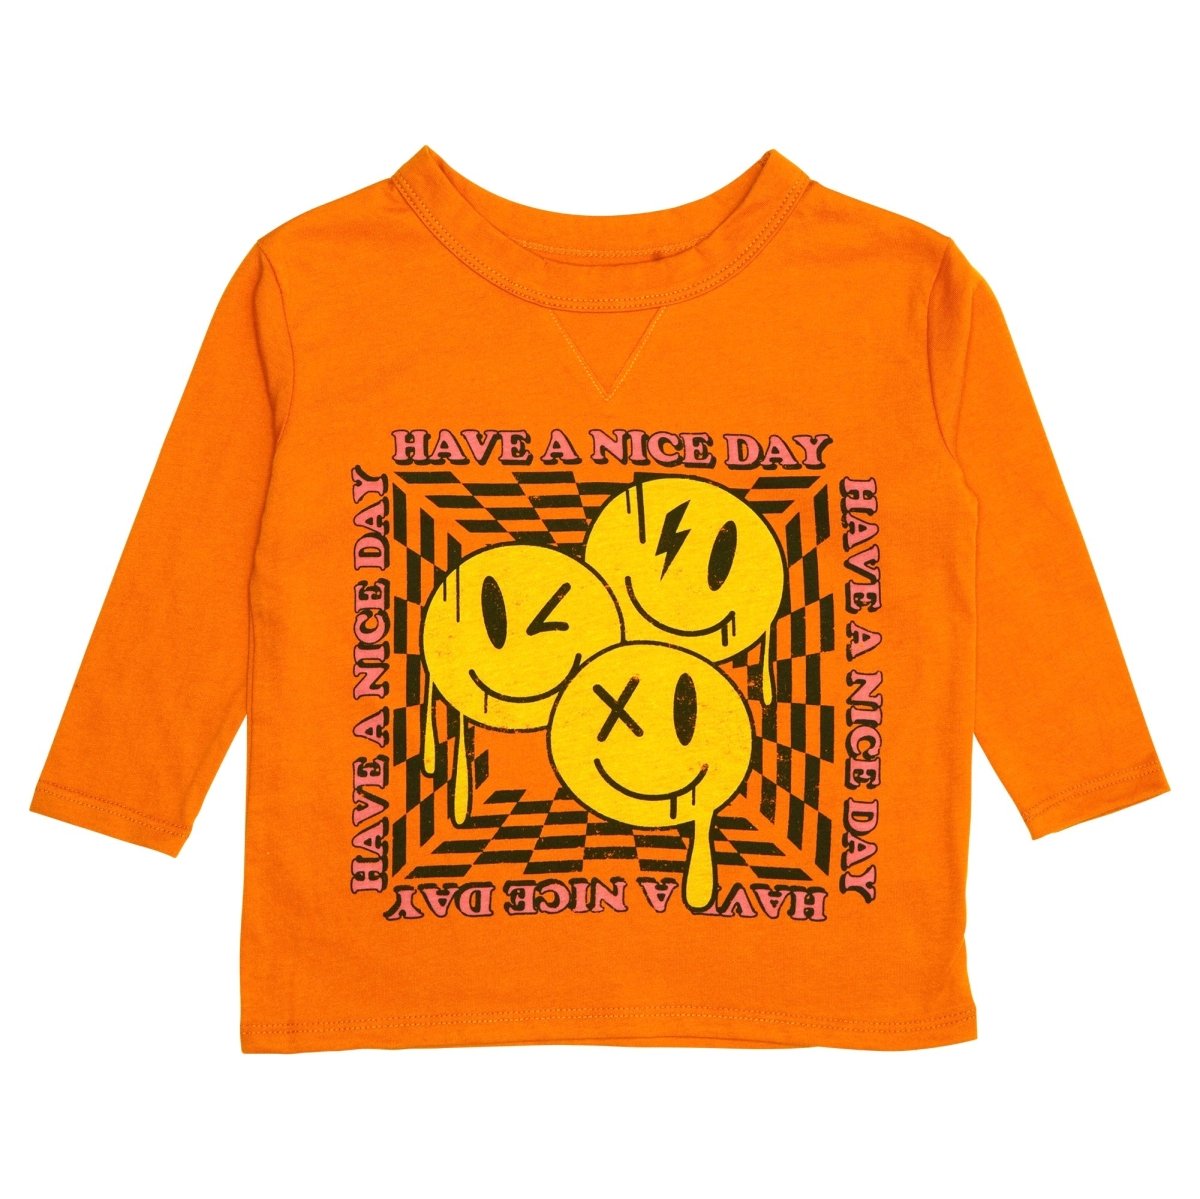 HAVE A NICE DAY LONG SLEEVE TSHIRT - CHASER KIDS